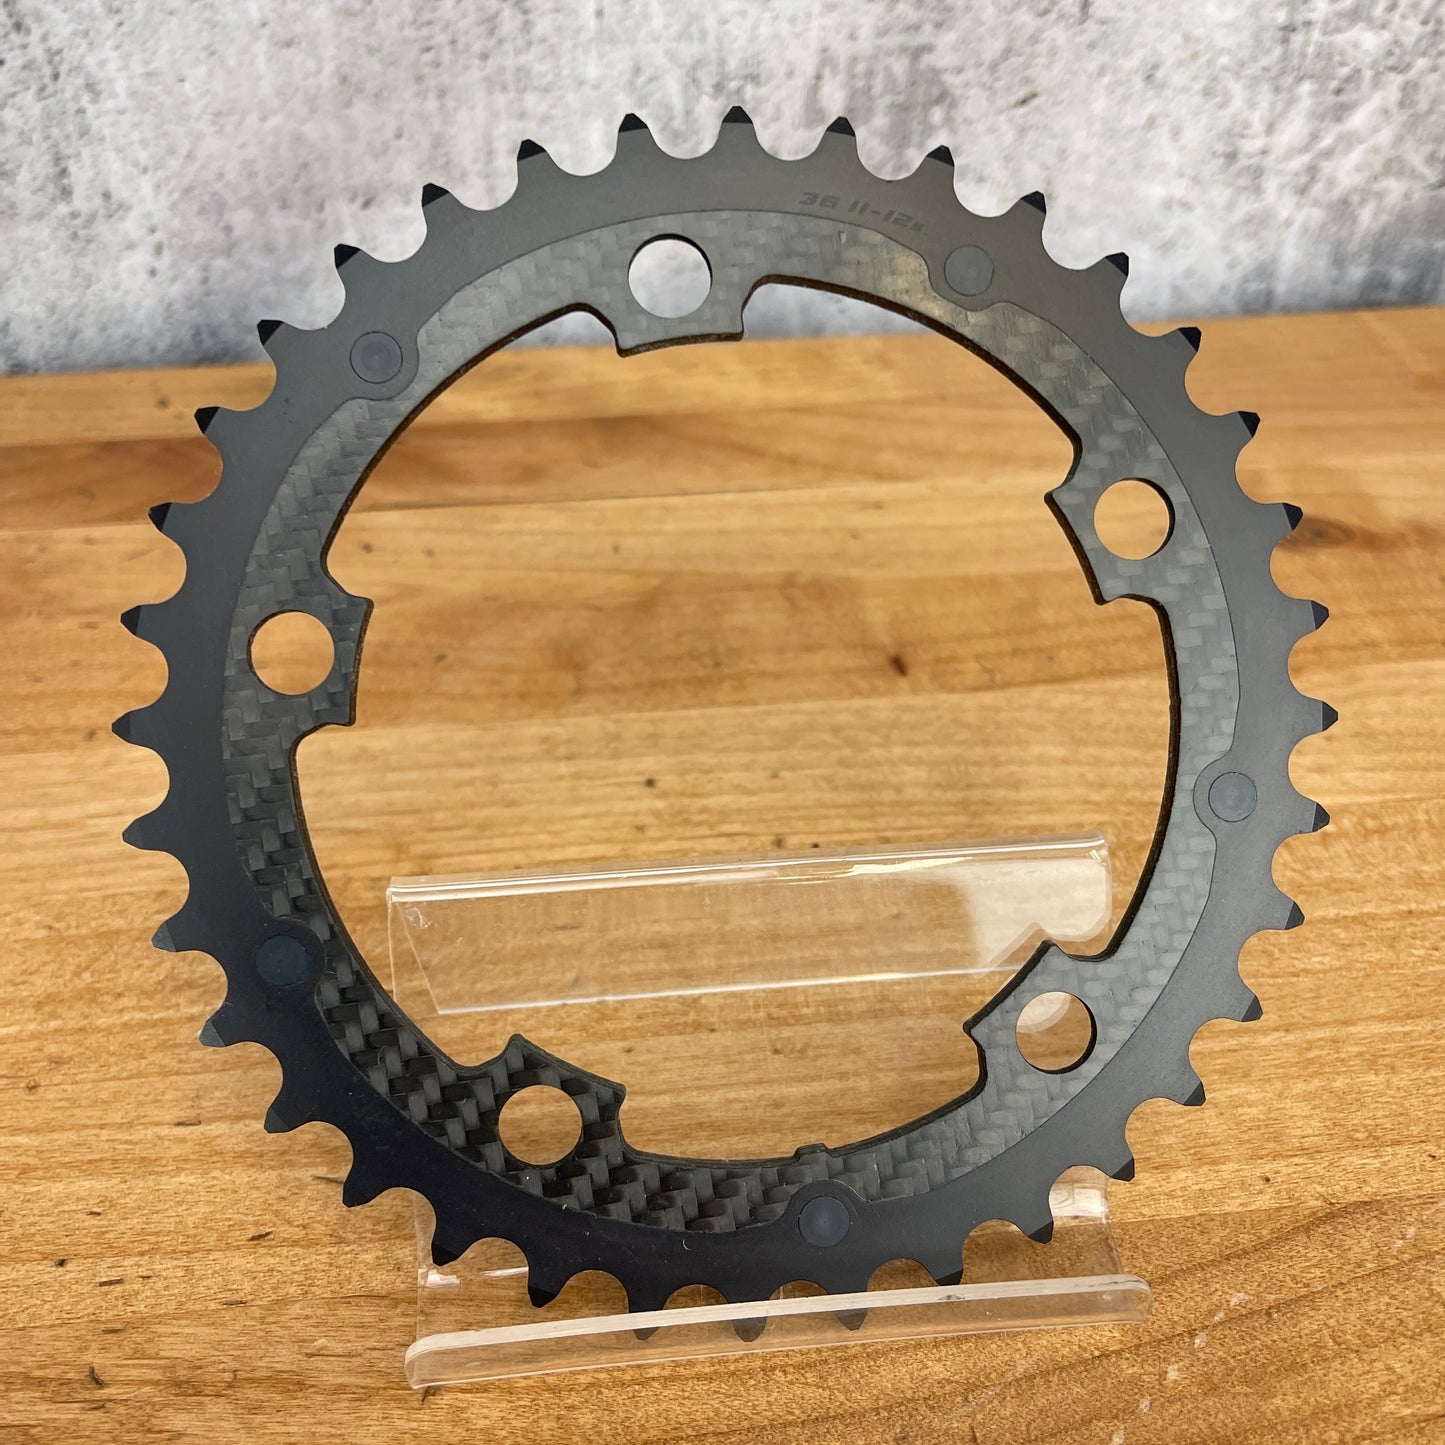 New! Carbon-Ti X-Carboring Evo 11/12-speed 52/36t Chainrings 5-Bolt 110BCD